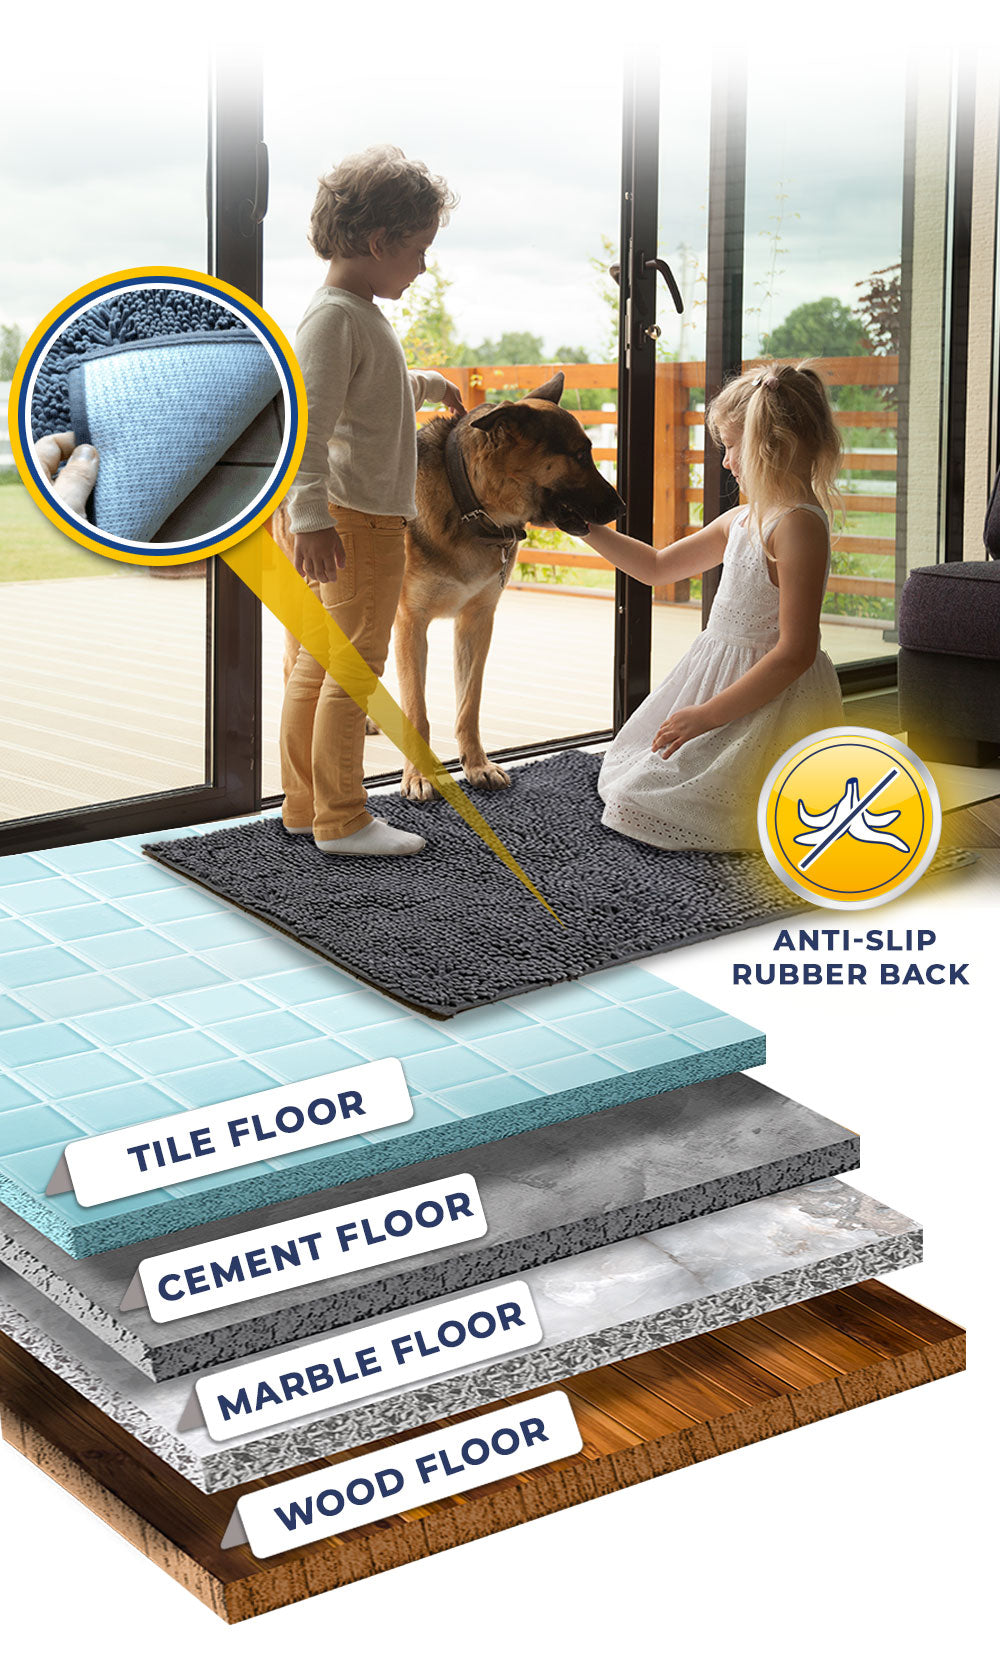 Muddy Mat - Time to change your old rugs to Muddy Mat! An ultra